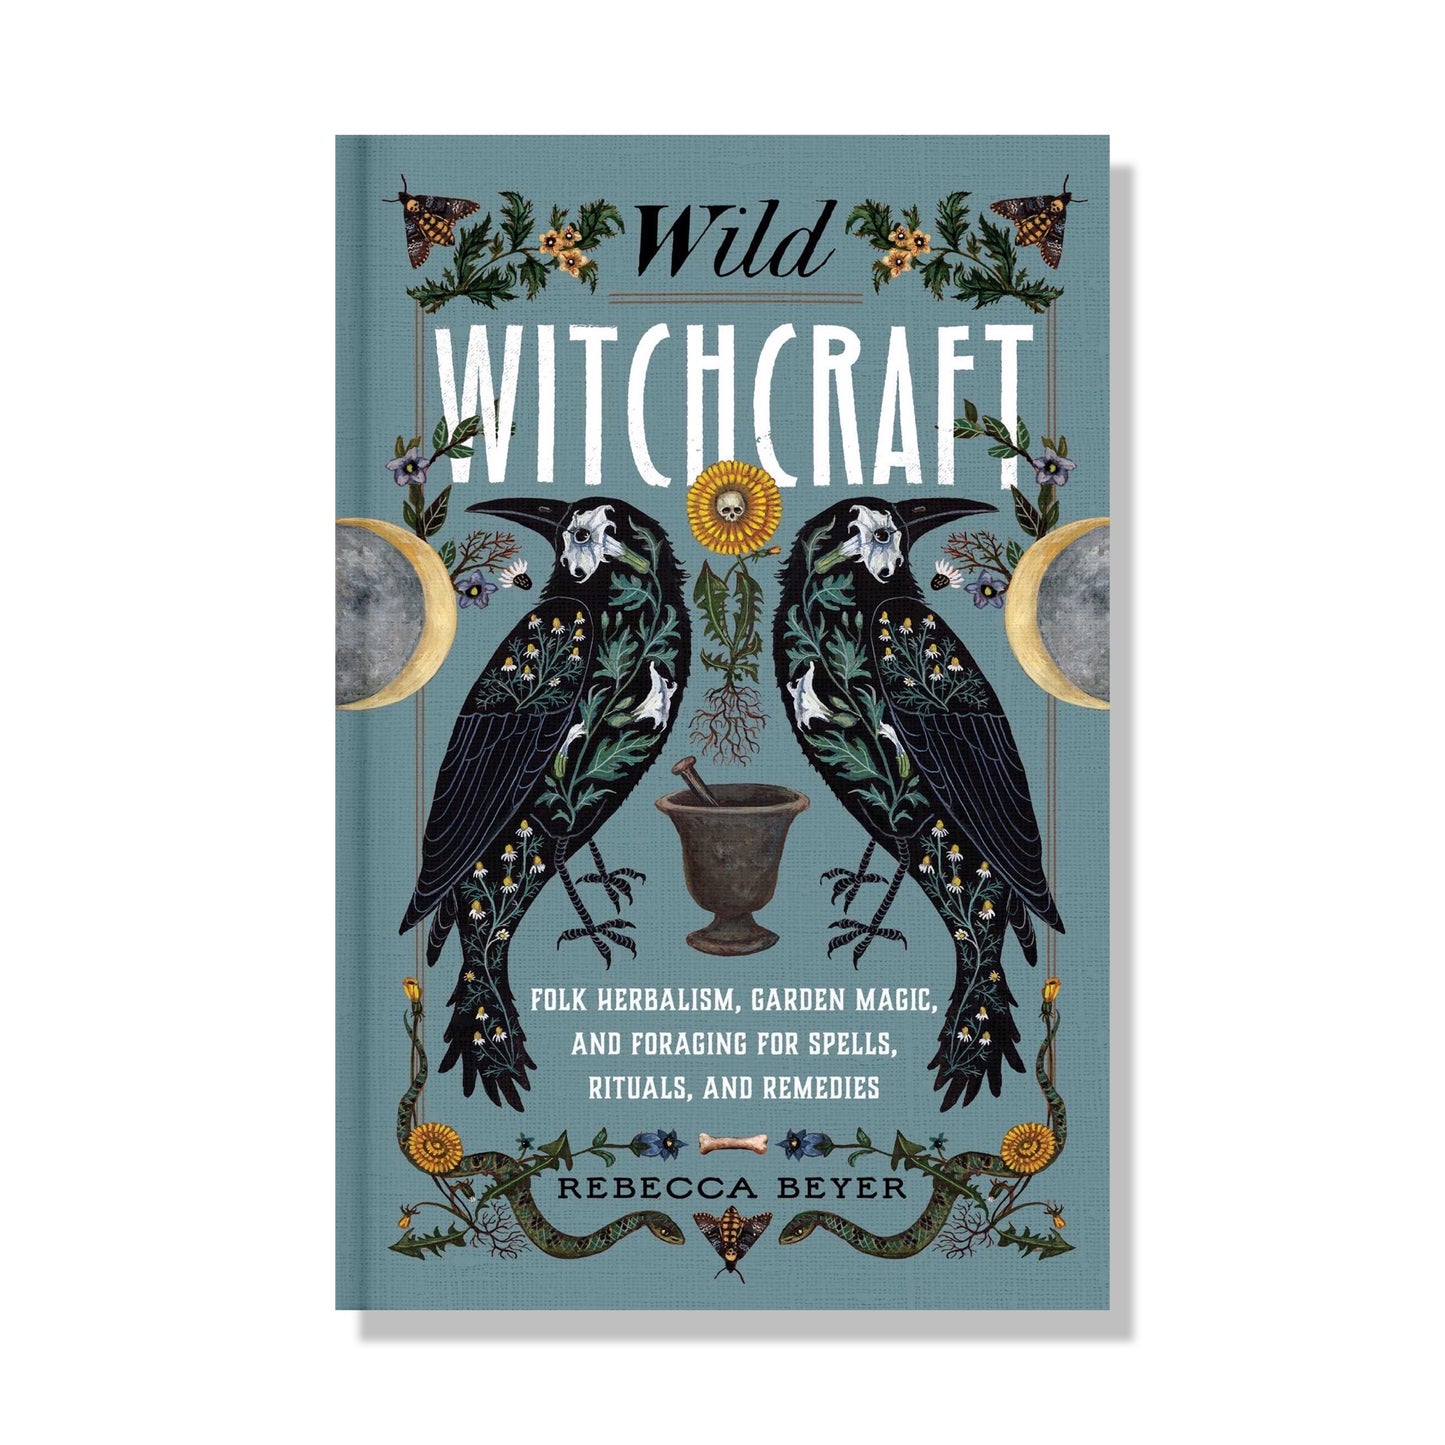 Wild Witchcraft: Folk Herbalism, Garden Magic, and Foraging Spells, Rituals, and Remedies